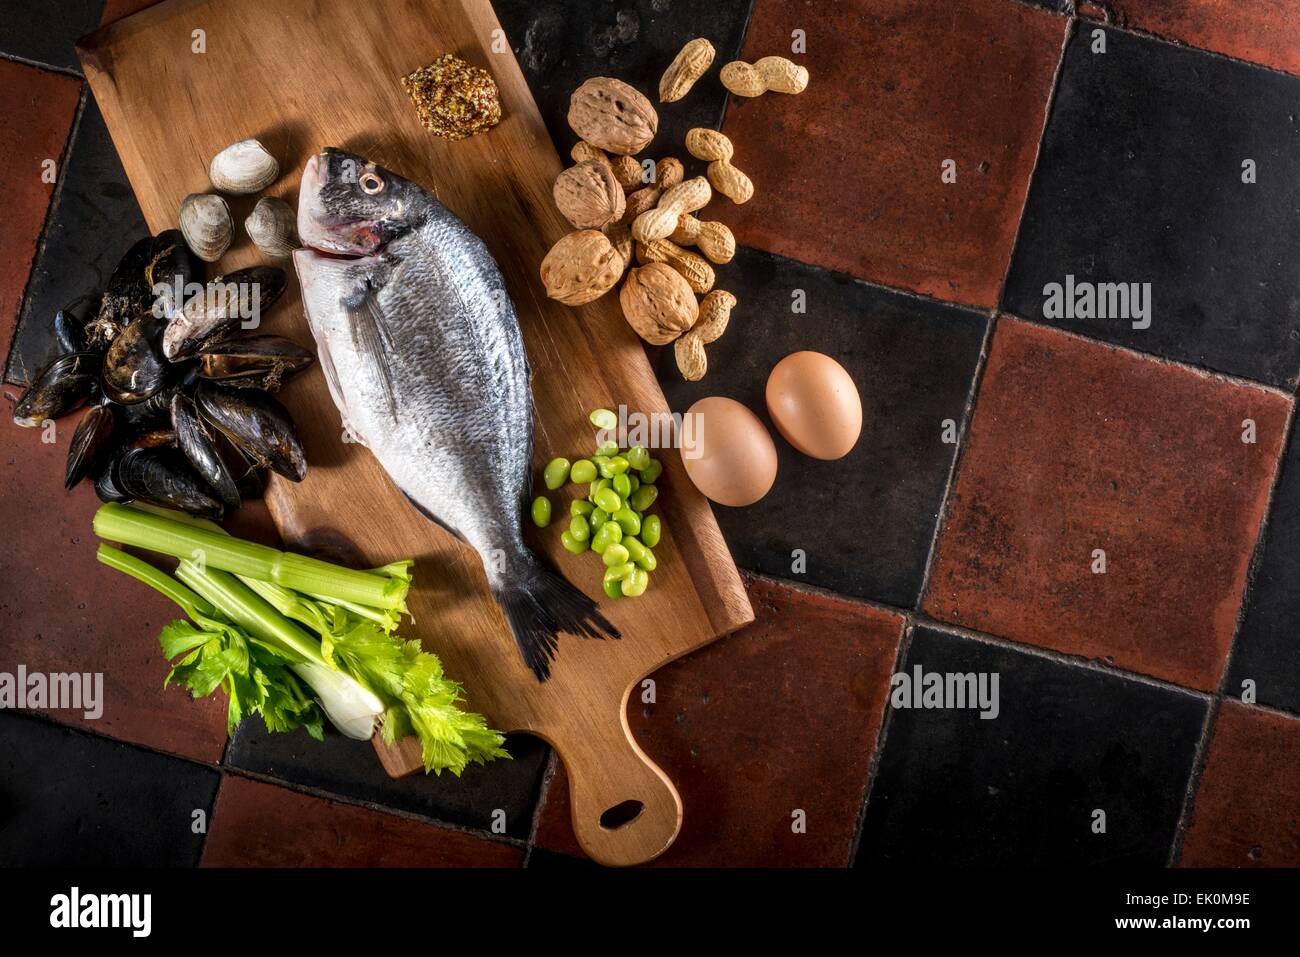 beans, celery, chopping board, crab, eggs, fish, food, food and drink, food preparation, fresh, health, healthy eating, high angle, high angle view, legumes, no one, no-one, nobody, nutrition, nuts, produce, raw, seafood, shellfish, still life, studio sho Stock Photo